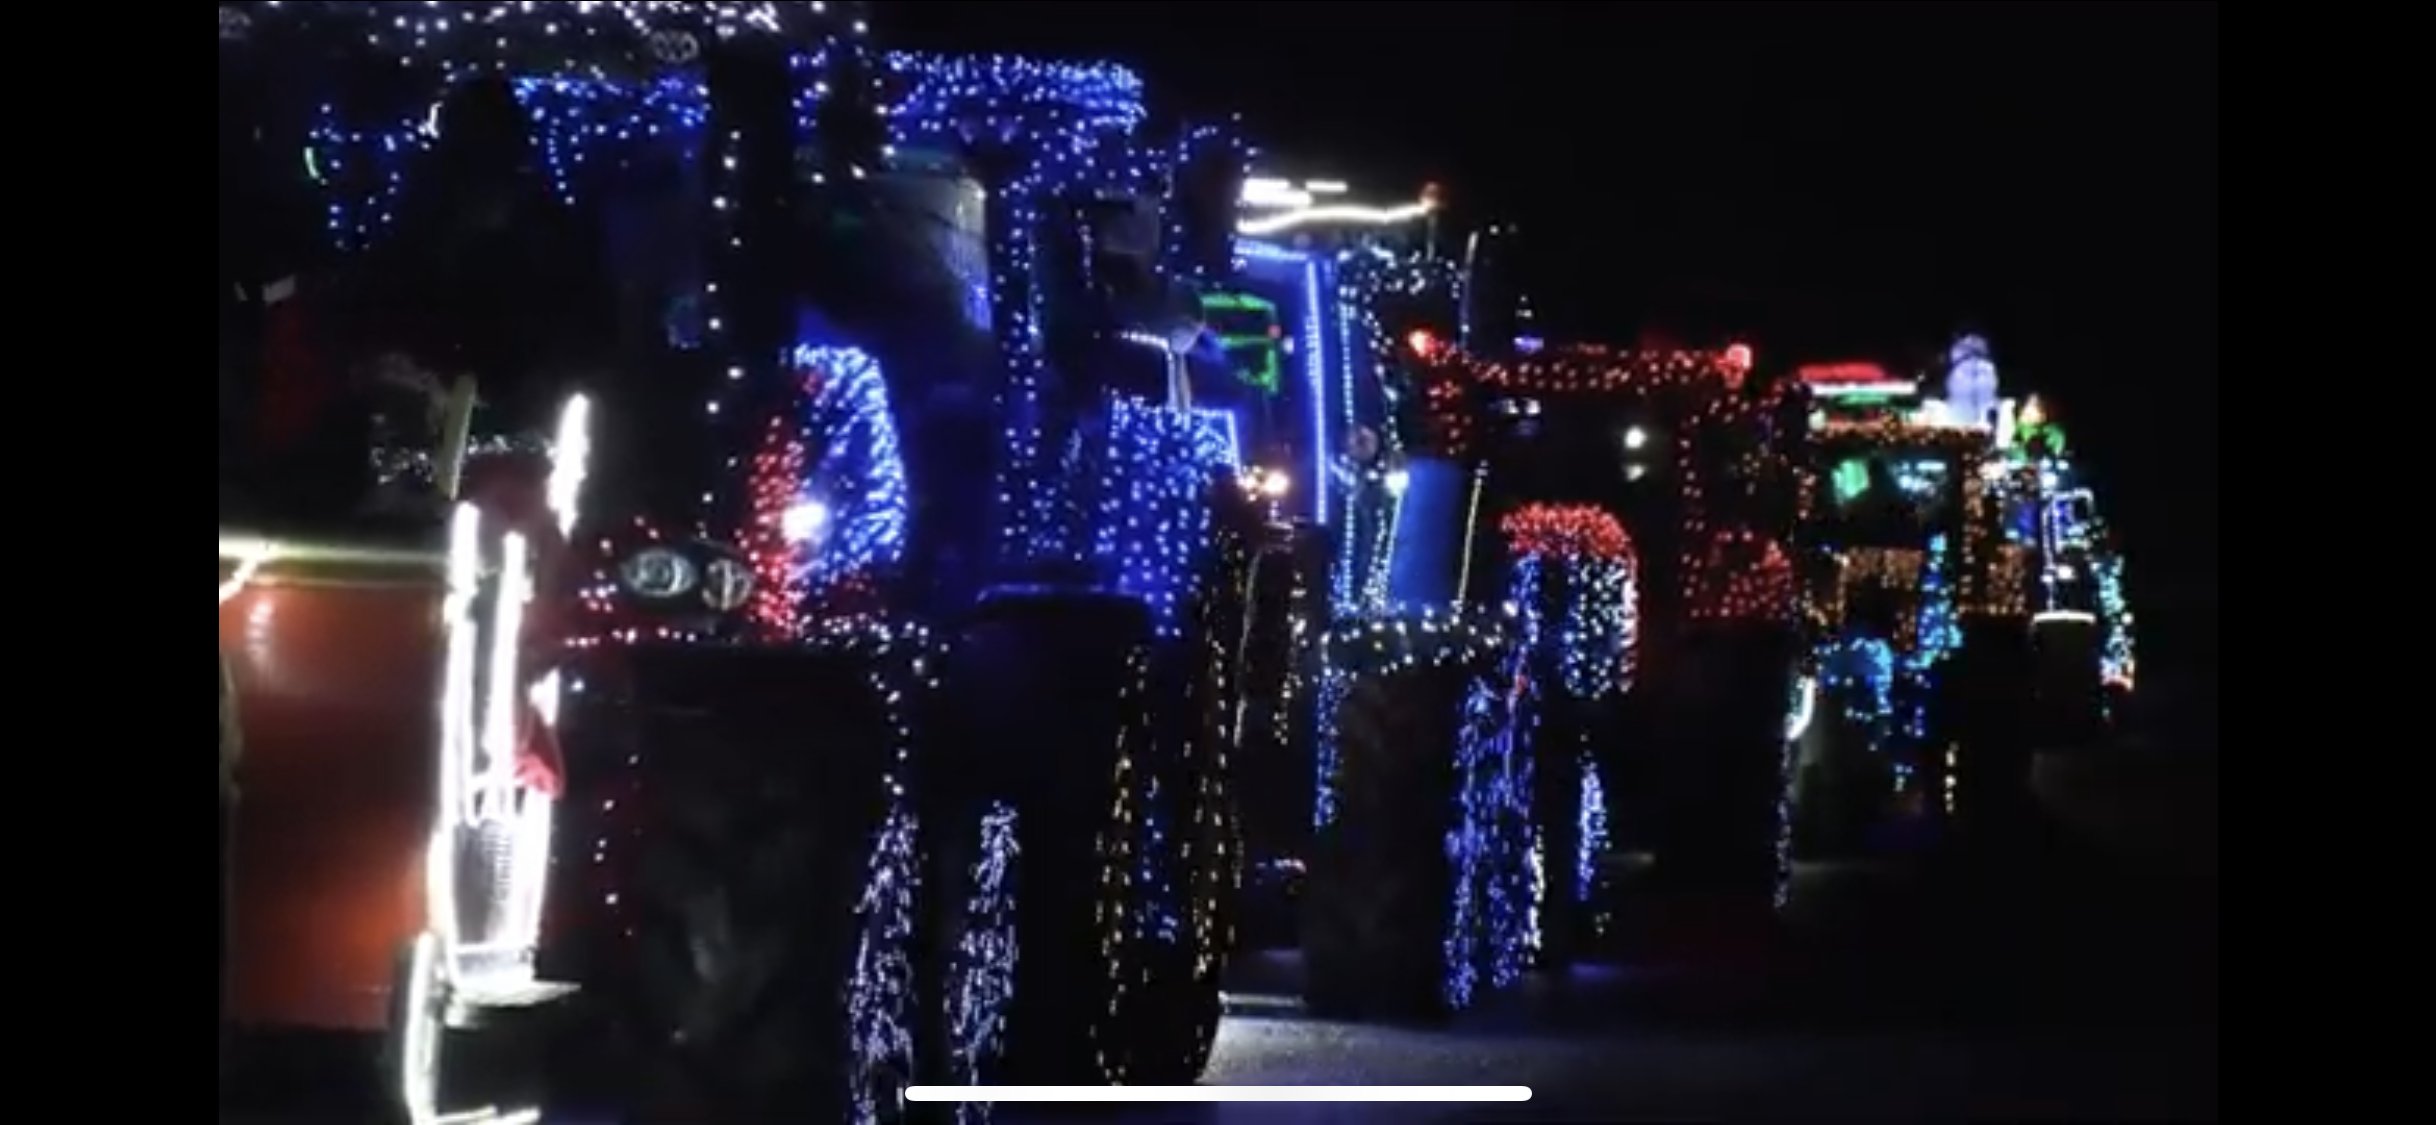 Photo of tractors with Christmas lights on at night